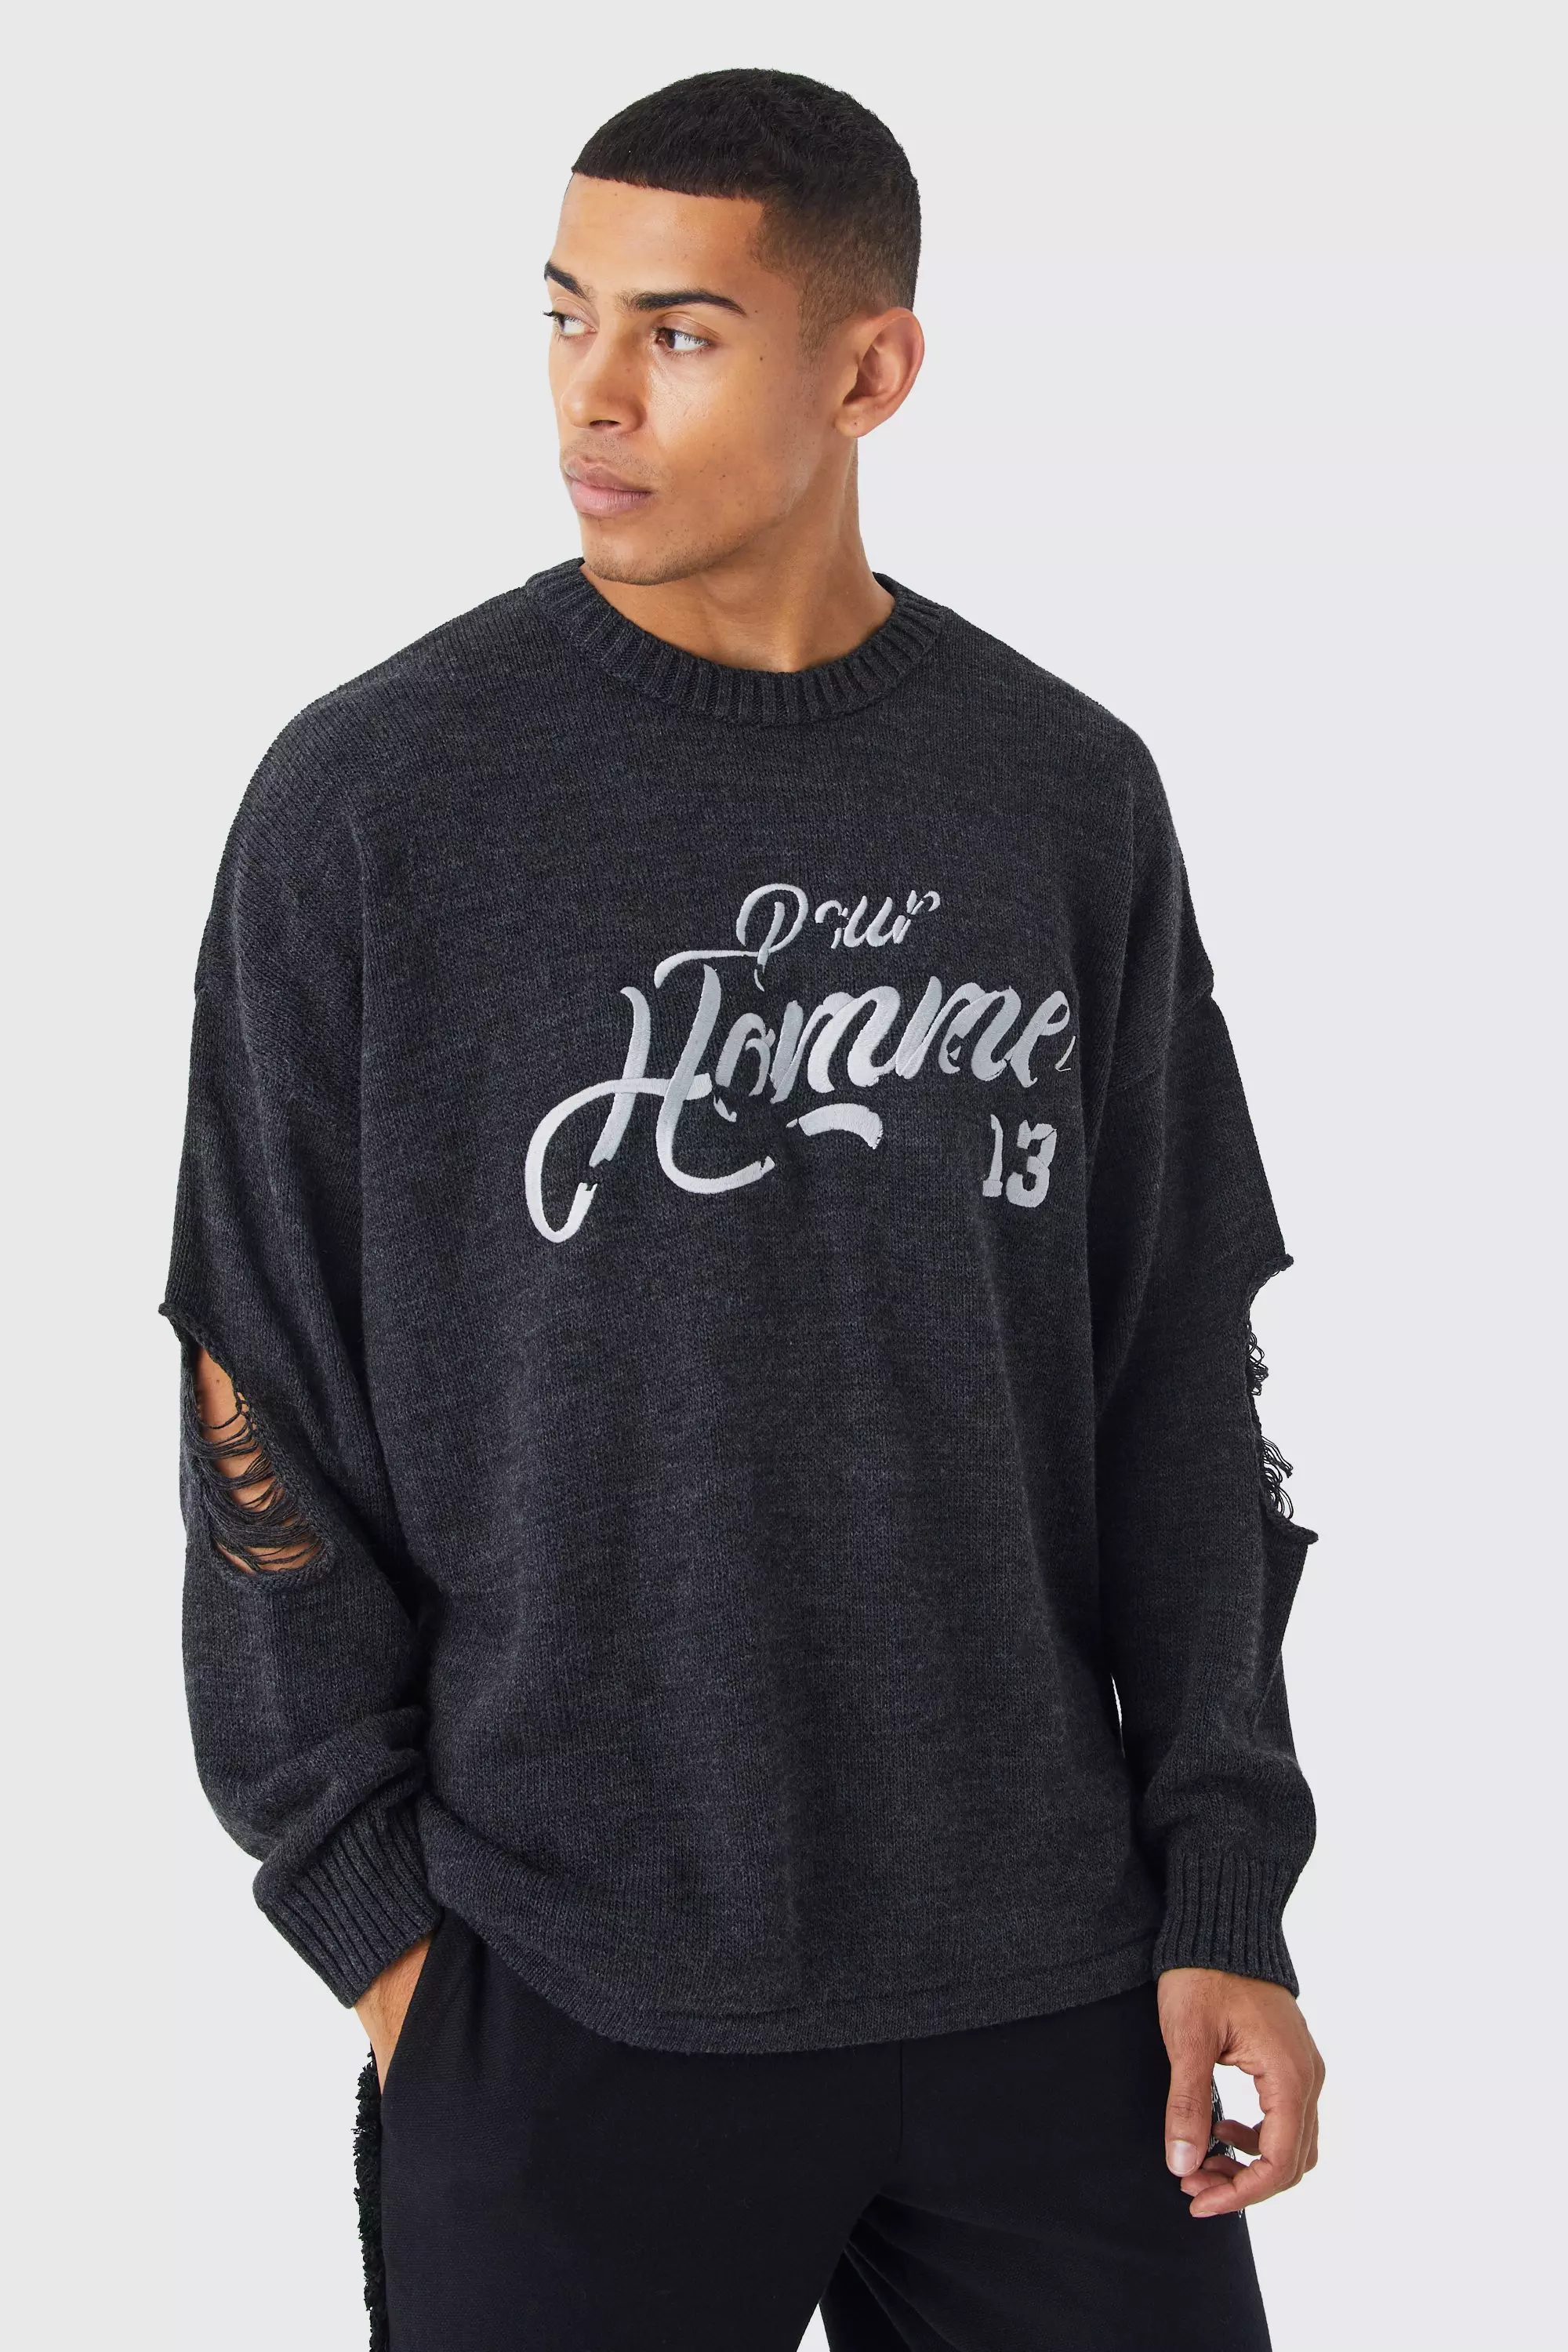 Oversized Homme Applique Distressed Sweater Black